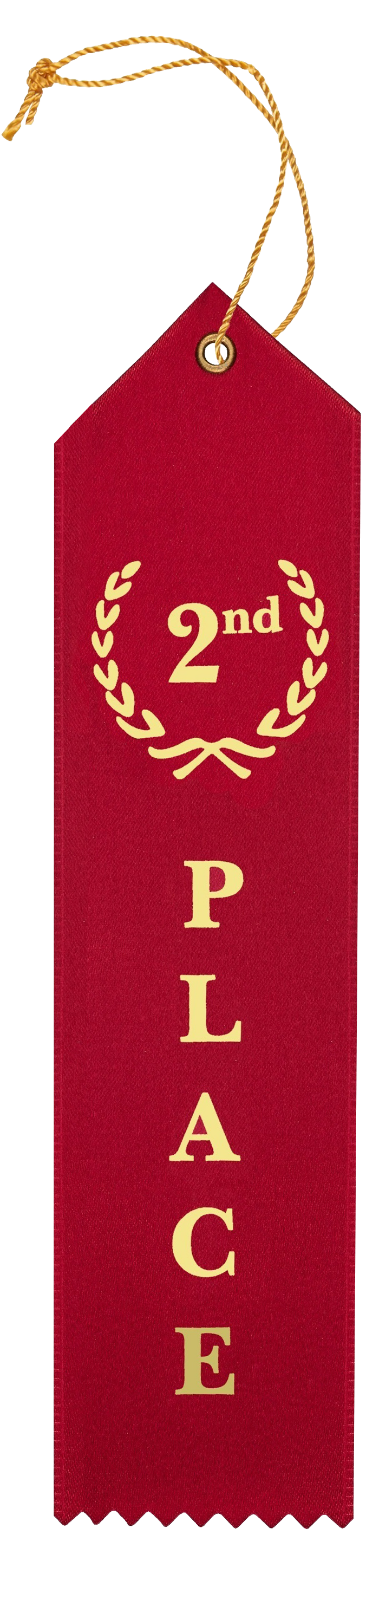 Flat Carded Award Ribbons 1st 2nd 3rd 4th 5th Place, Blue Red White Yellow Green Clinch Star CS-AR-FWC-1-5-60 - фотография #5